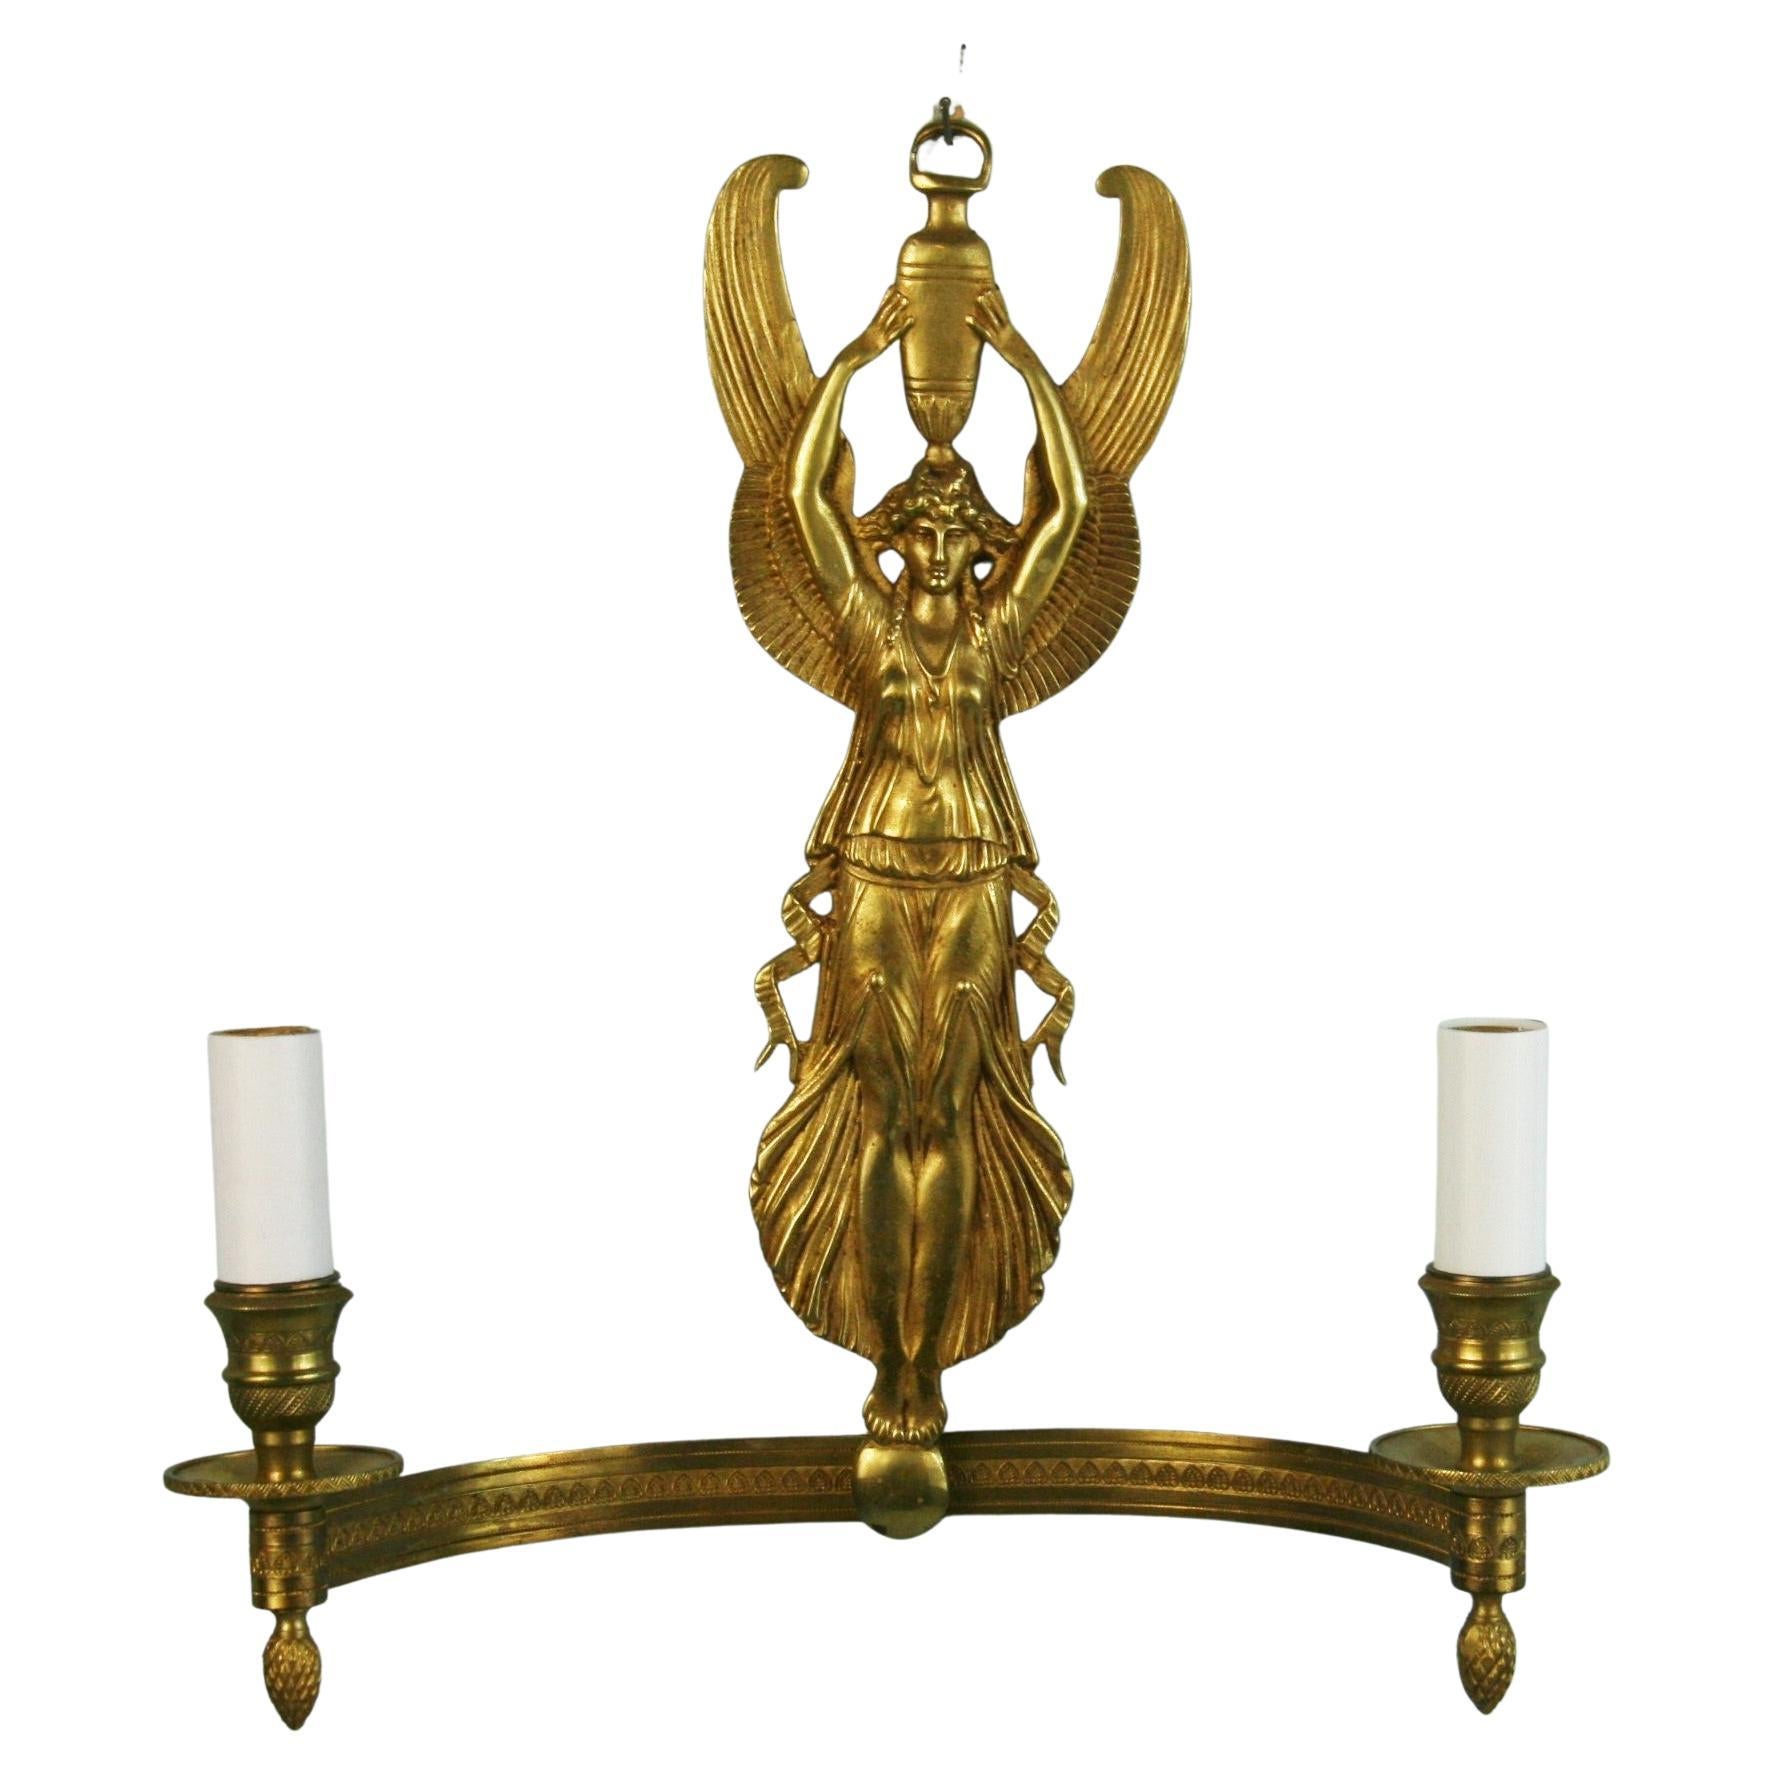  French Empire  Winged Figural Wall Sconces 1920's a Pair For Sale